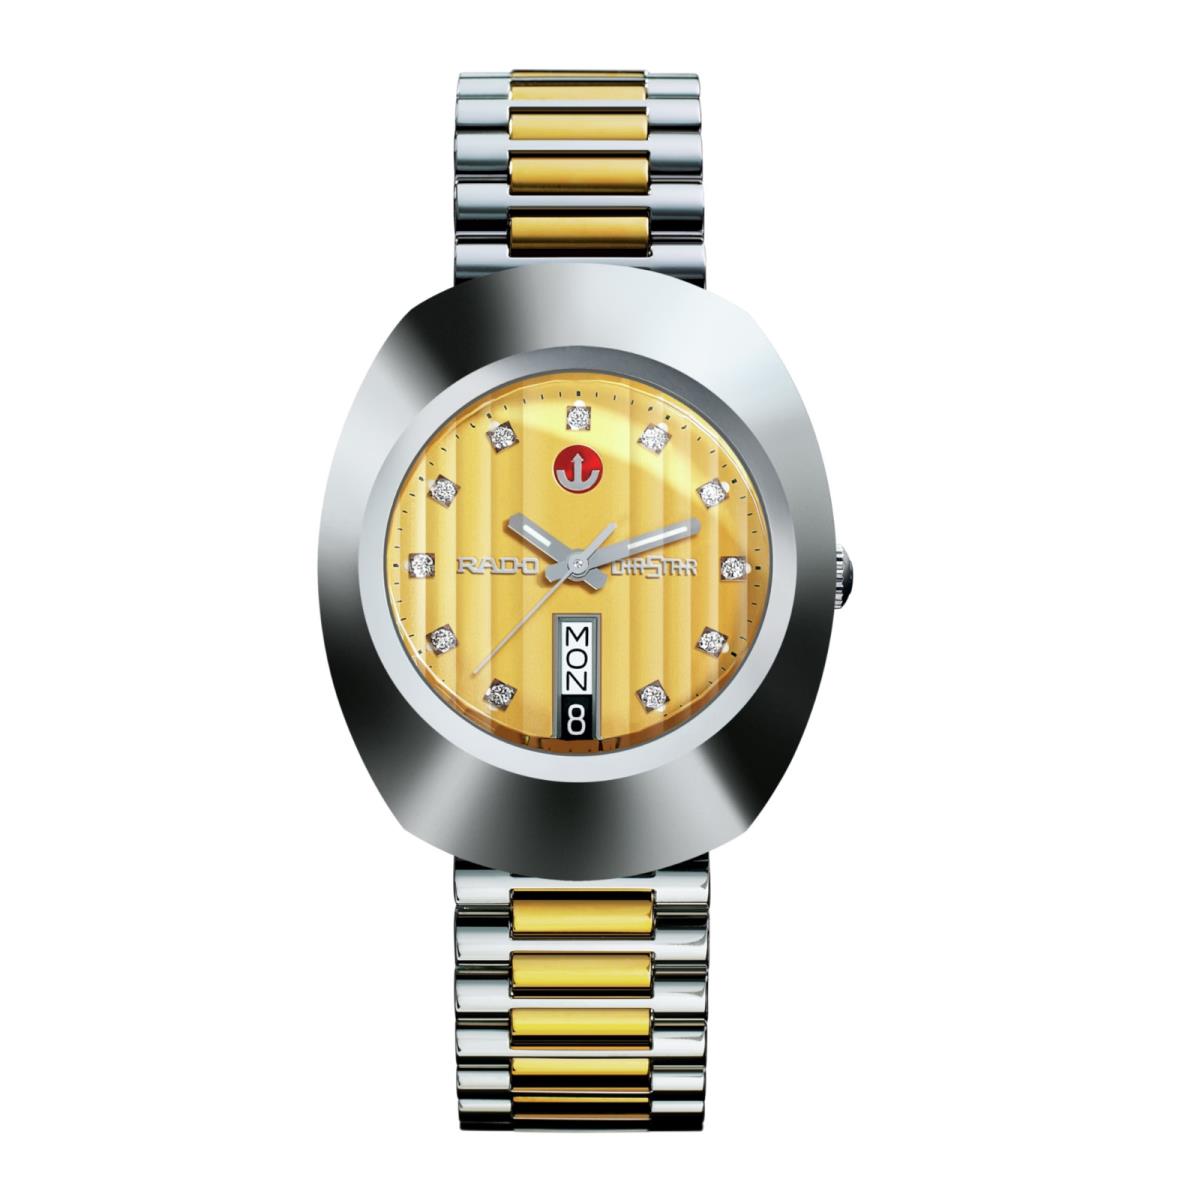 Rado 35 mm Gold Dial Automatic Diastar Stainless Steel Watch R12408633